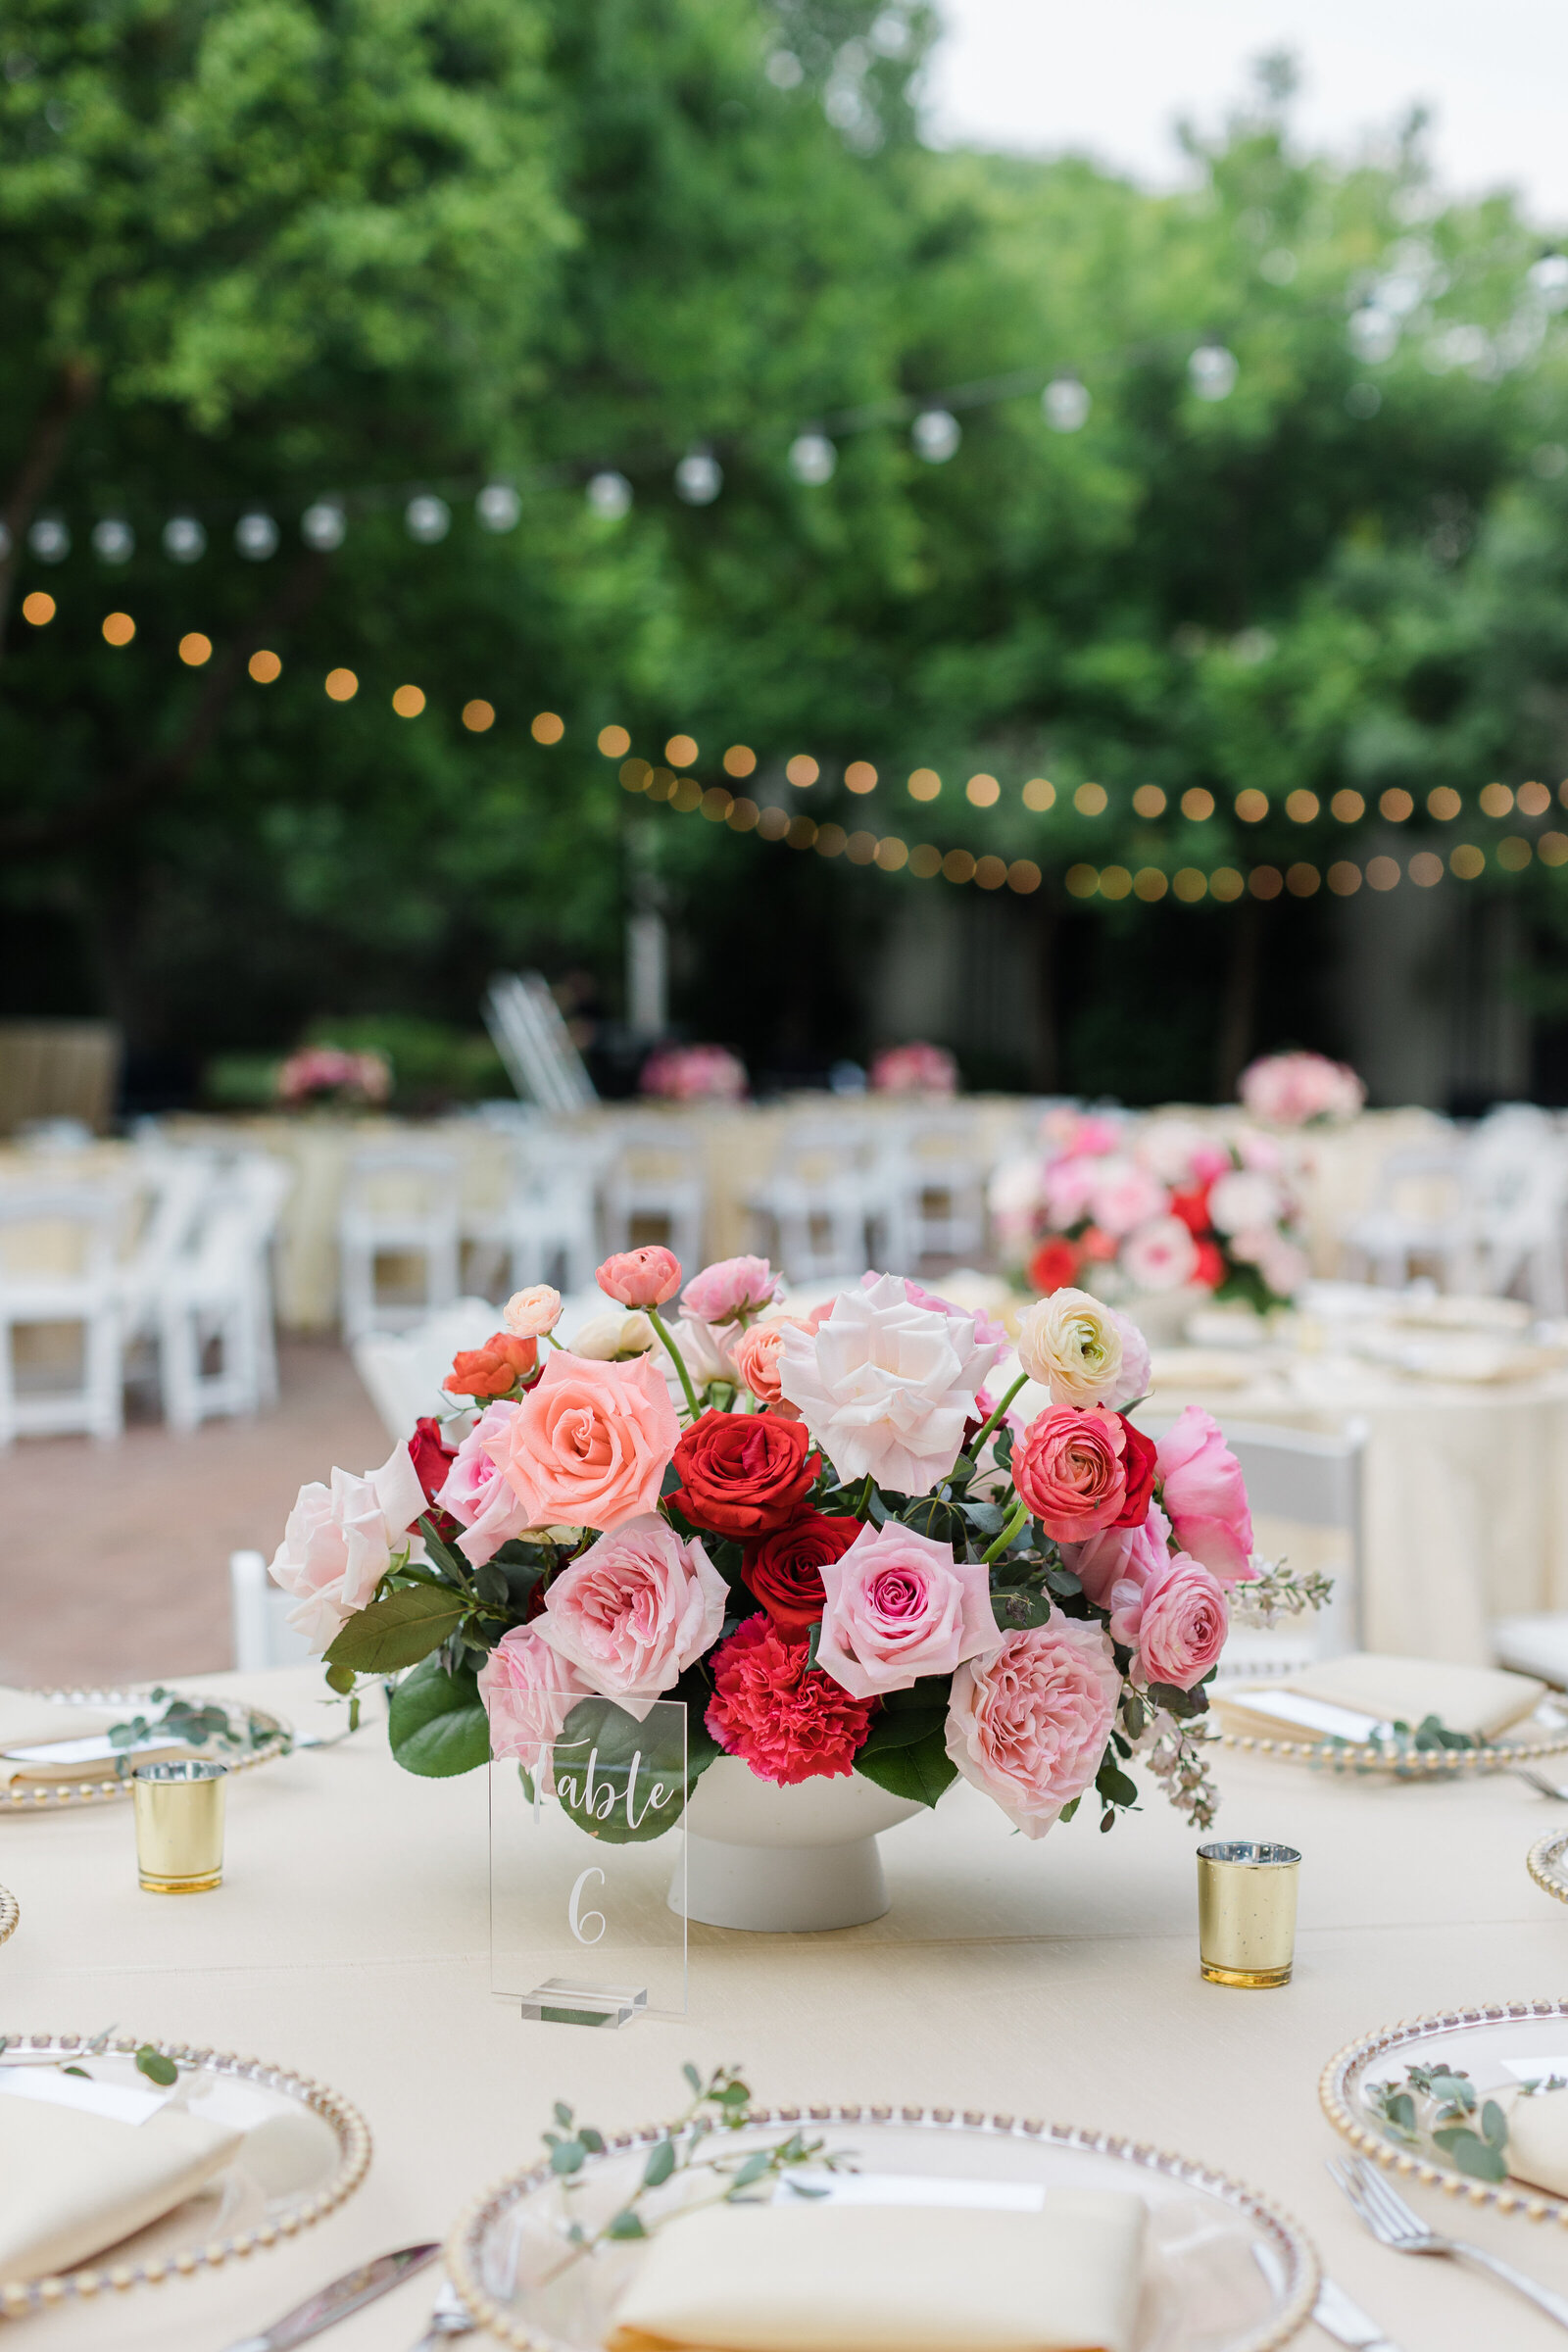 A detail shot of a wedding reception table centerpiece at the Dallas Arboretum in Dallas, Texas. The centerpiece is composed of many pink and red roses and is surrounded by a table number sign, plates, cutlery, napkins, and candles. Similar tables can be see out of focus in the background.